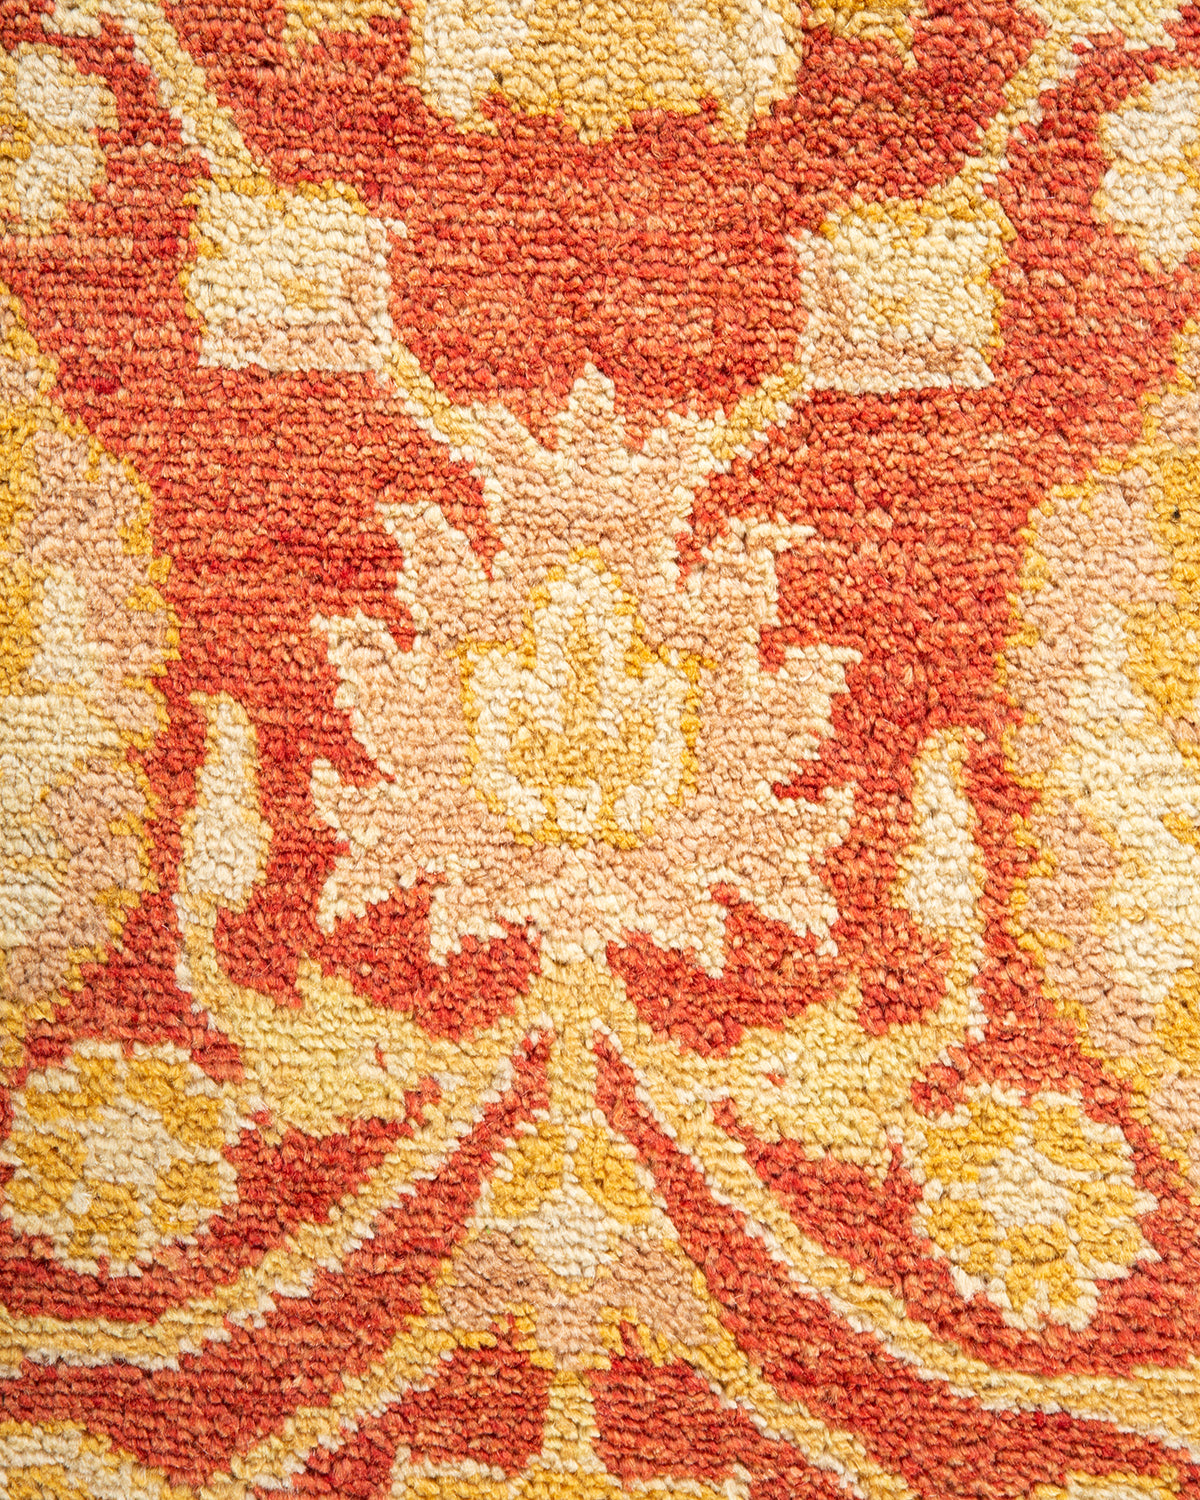 Eclectic, One-of-a-Kind Hand-Knotted Area Rug  - Orange, 8' 10" x 12' 3"